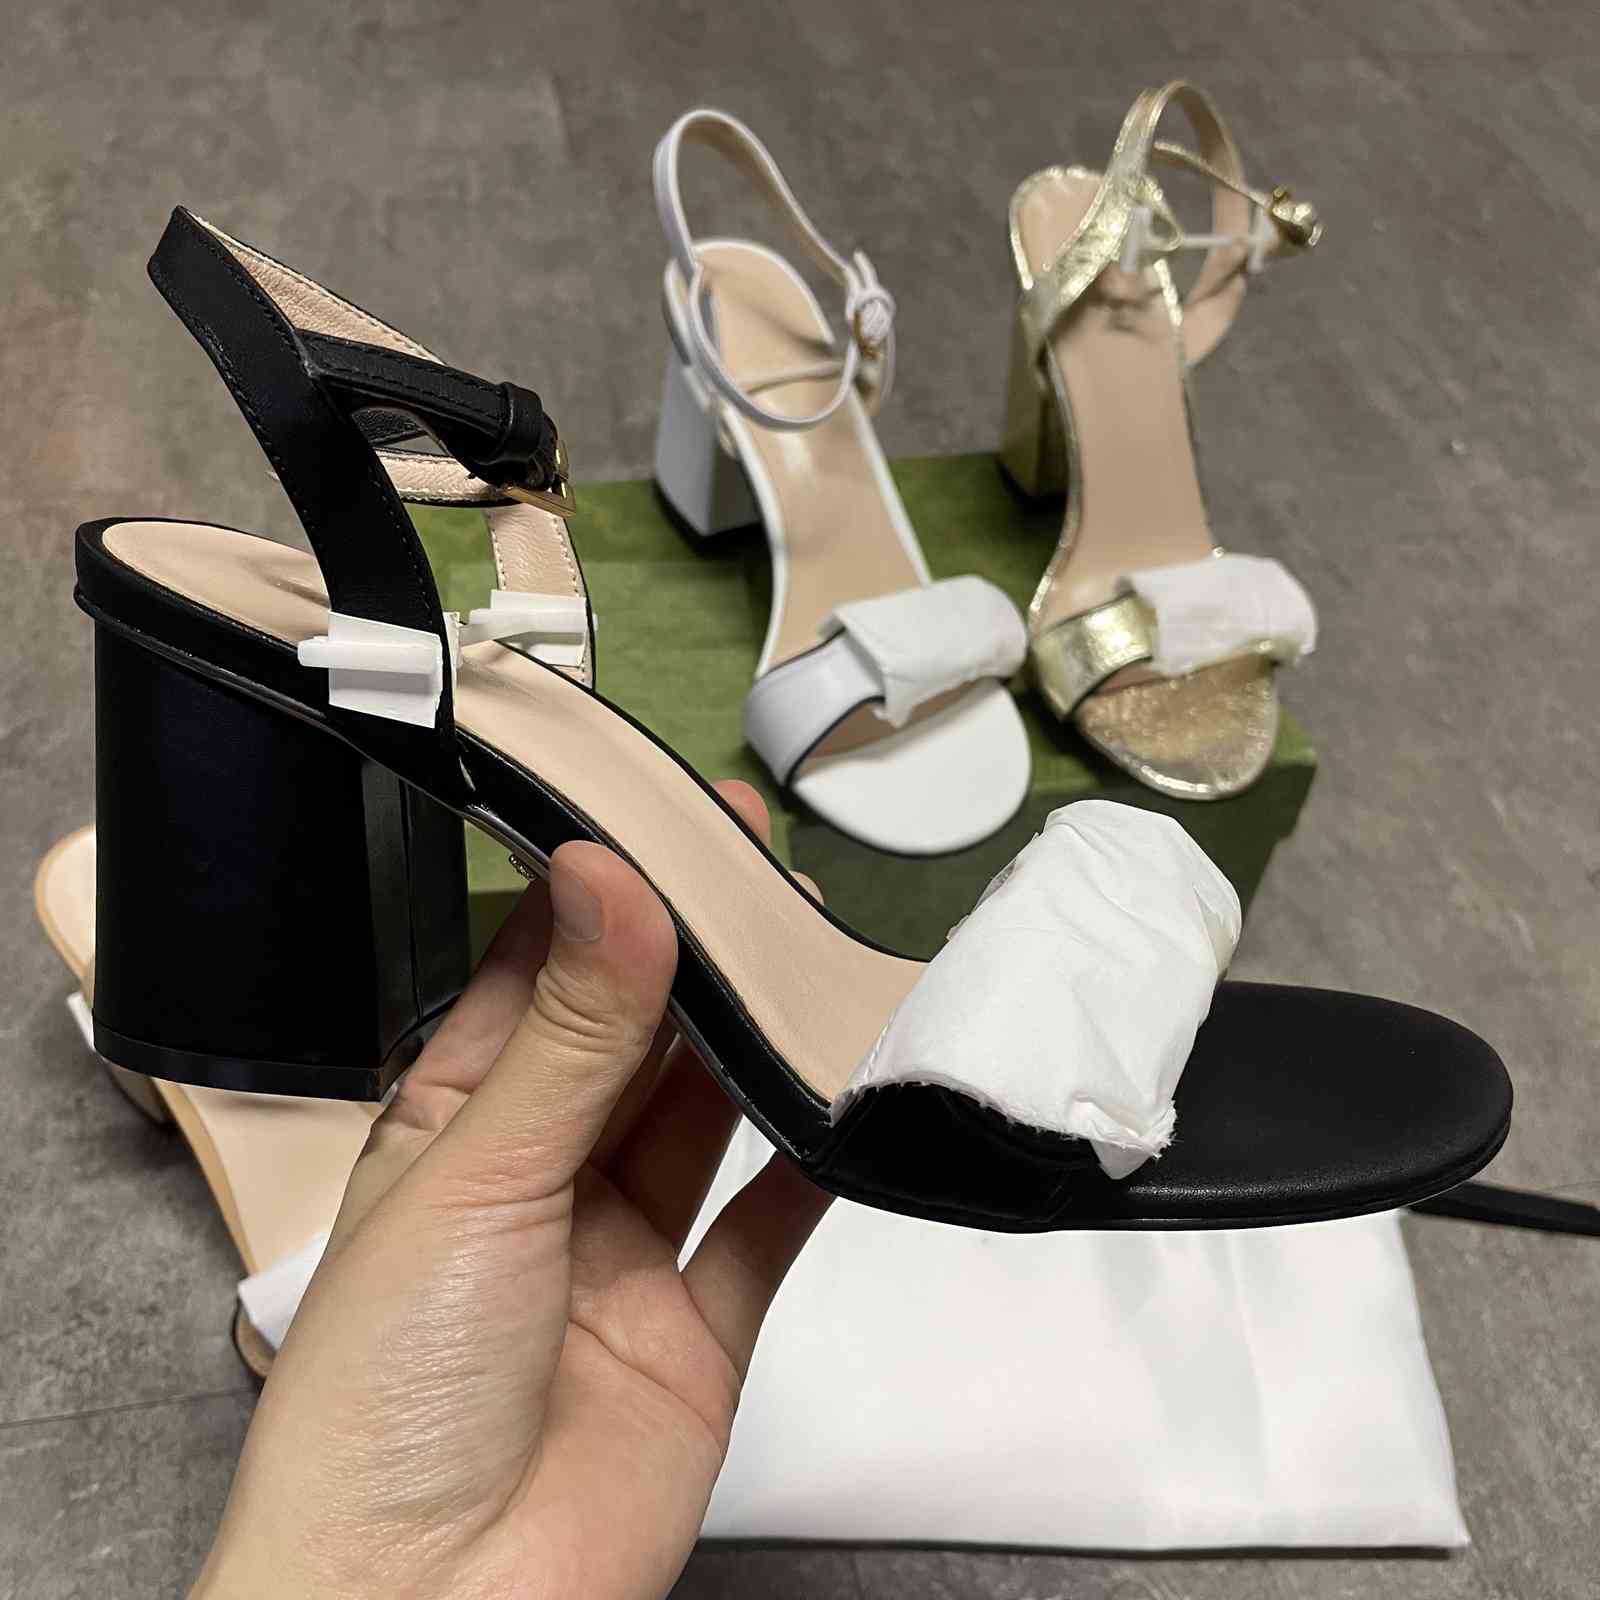 2021 Women Leather mid-heel sandal 7.5CM and 10.5 CM Black White 6Colors High Heel Summer Beach Sexy Shoes With Box NO21